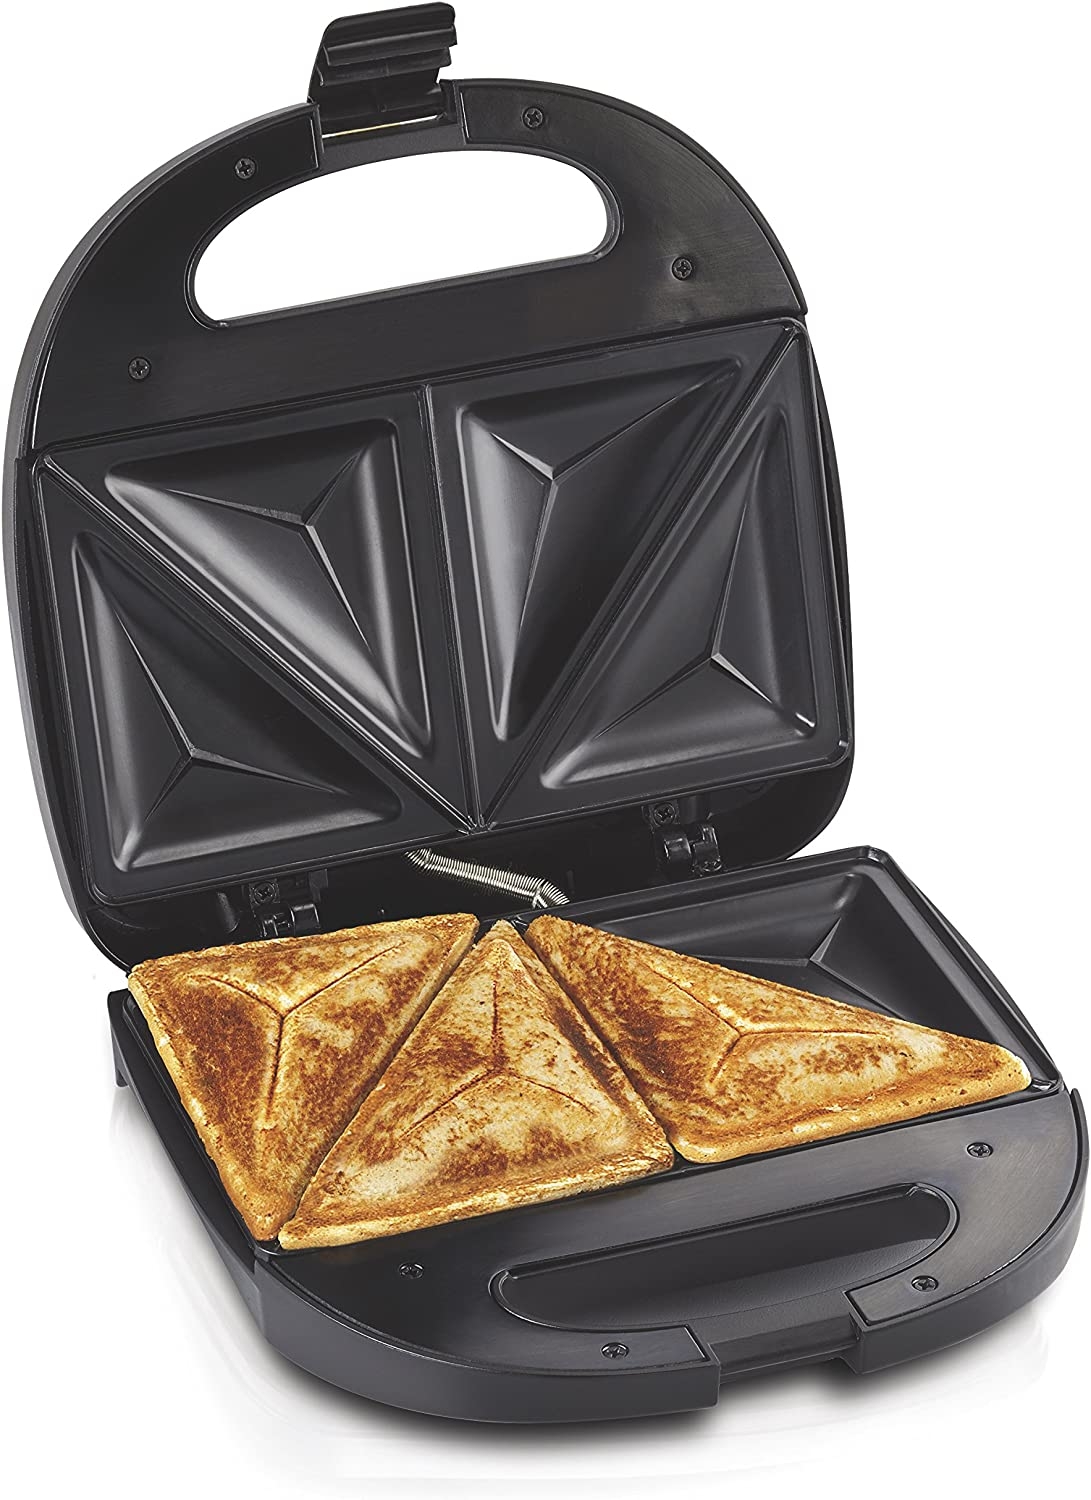 Hamilton Beach Electric Sandwich Maker Toaster with Nonstick Plates Makes Omelets and Grilled Cheese, 4 Inch, Easy to Store,